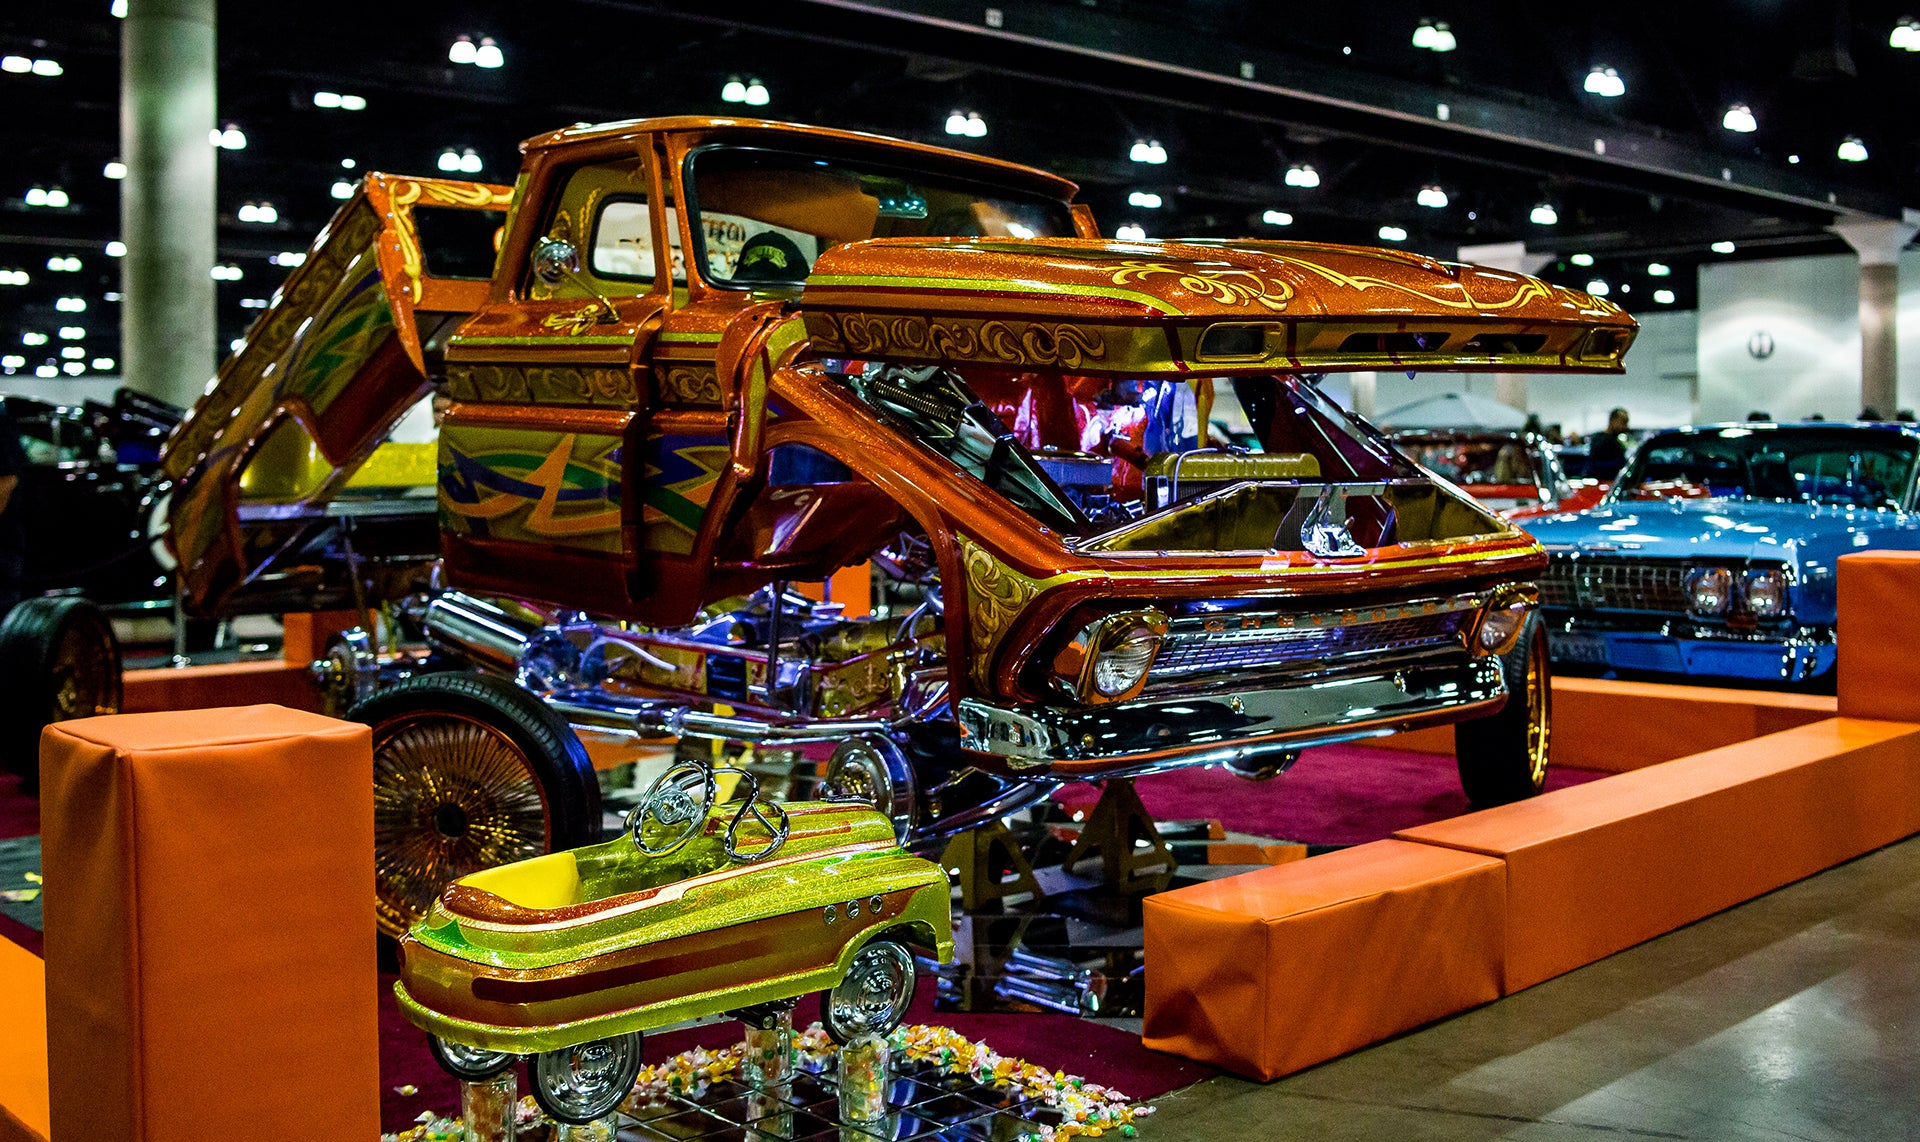 lowrider truck posted next to matching toy truck